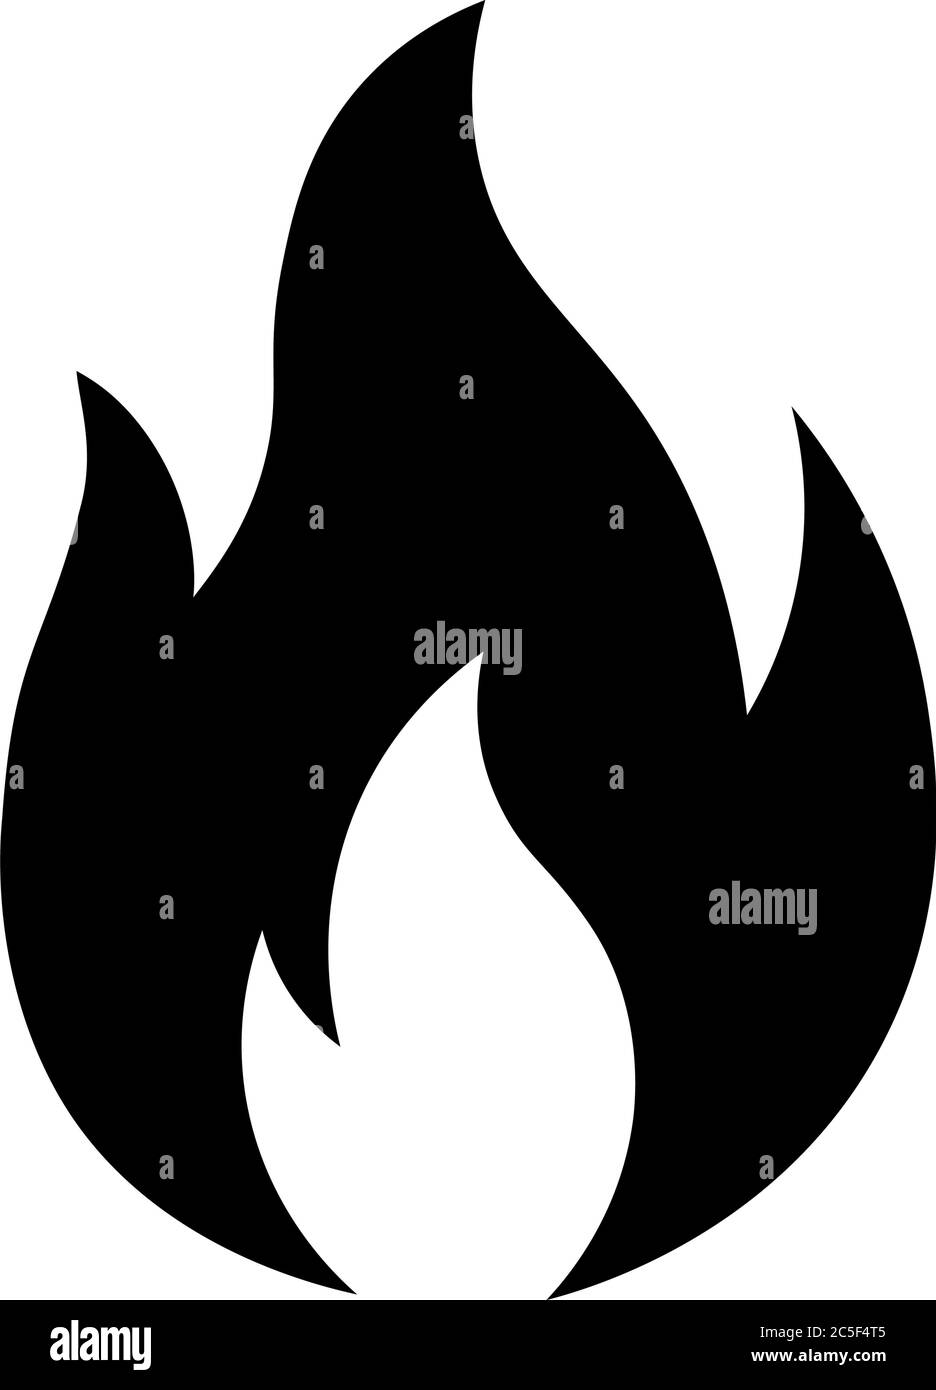 Fire flame vector symbol black icon isolated on white background hot flammable symbol Stock Vector